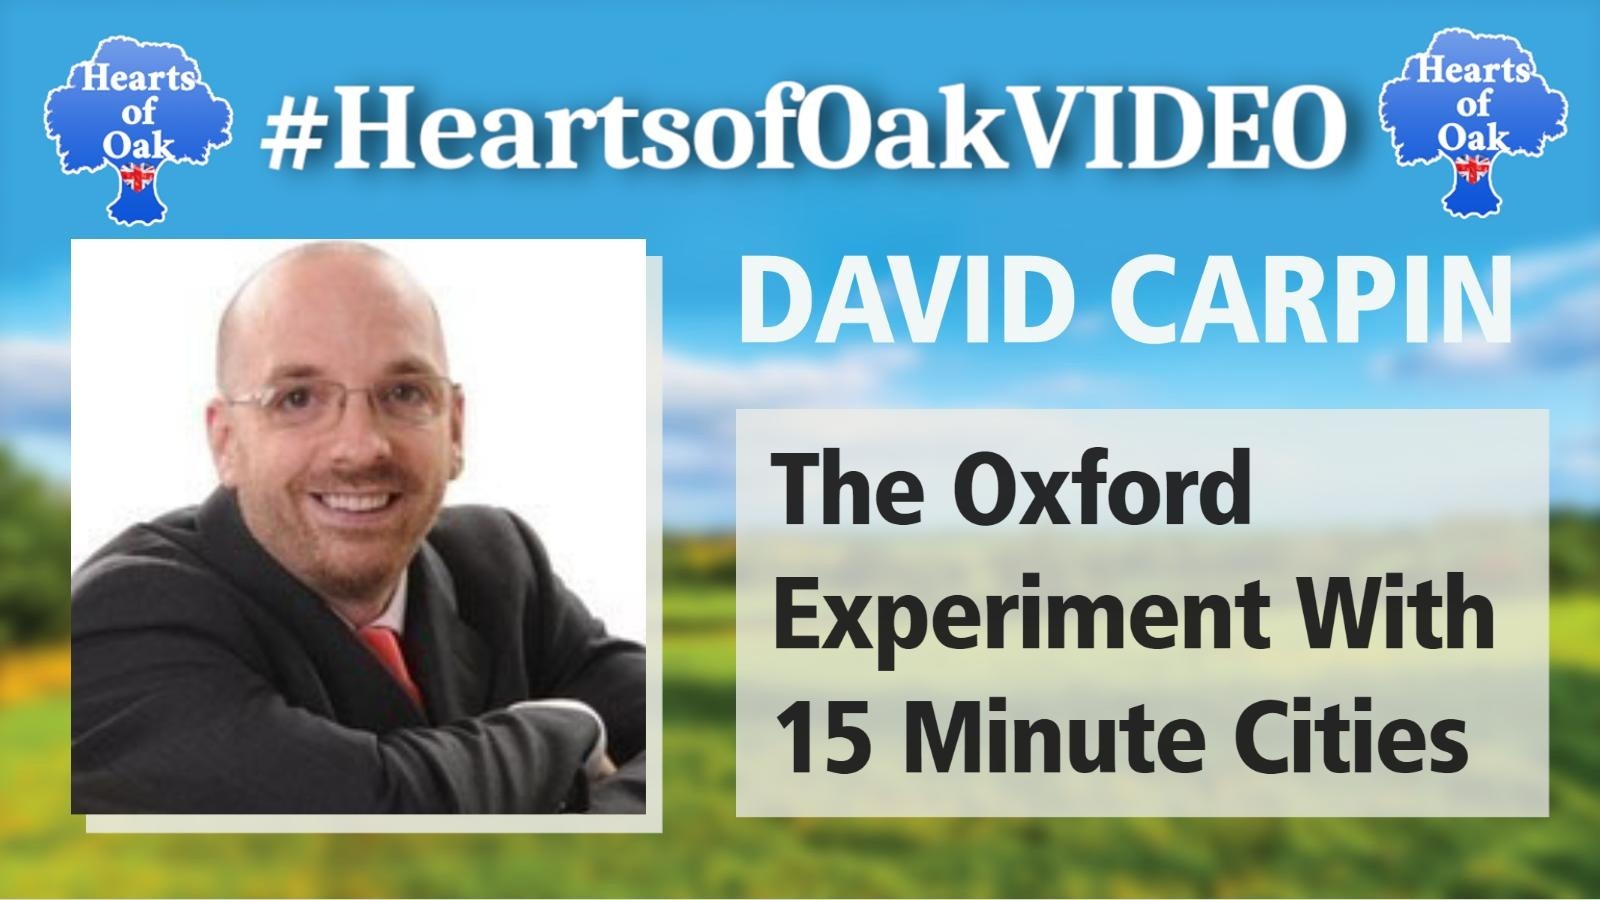 David Carpin - The Oxford Experiment With 15 Minute Cities